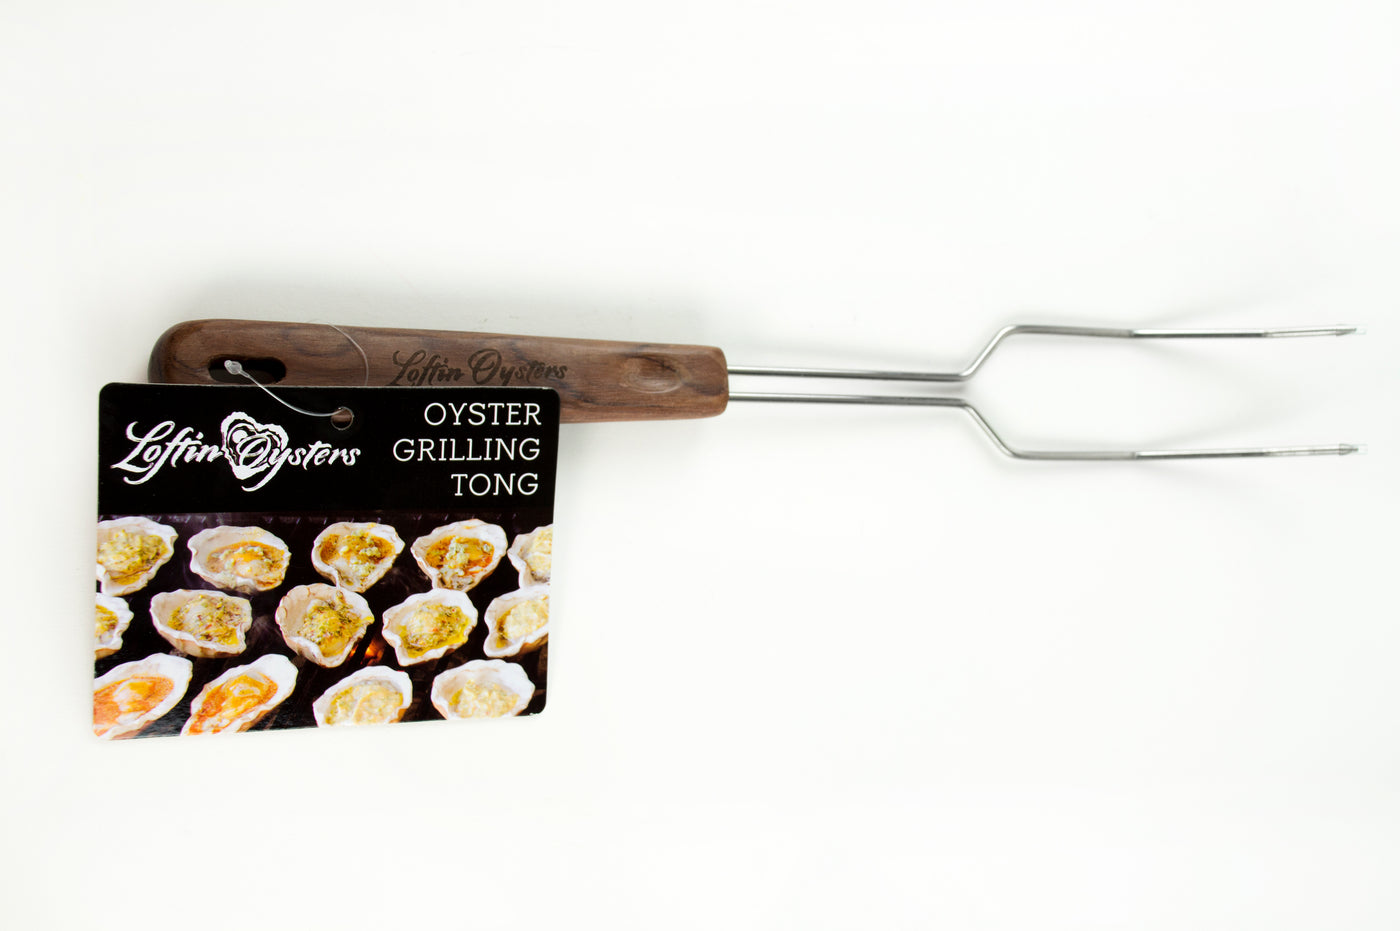 Loftin Oyster grilling tong